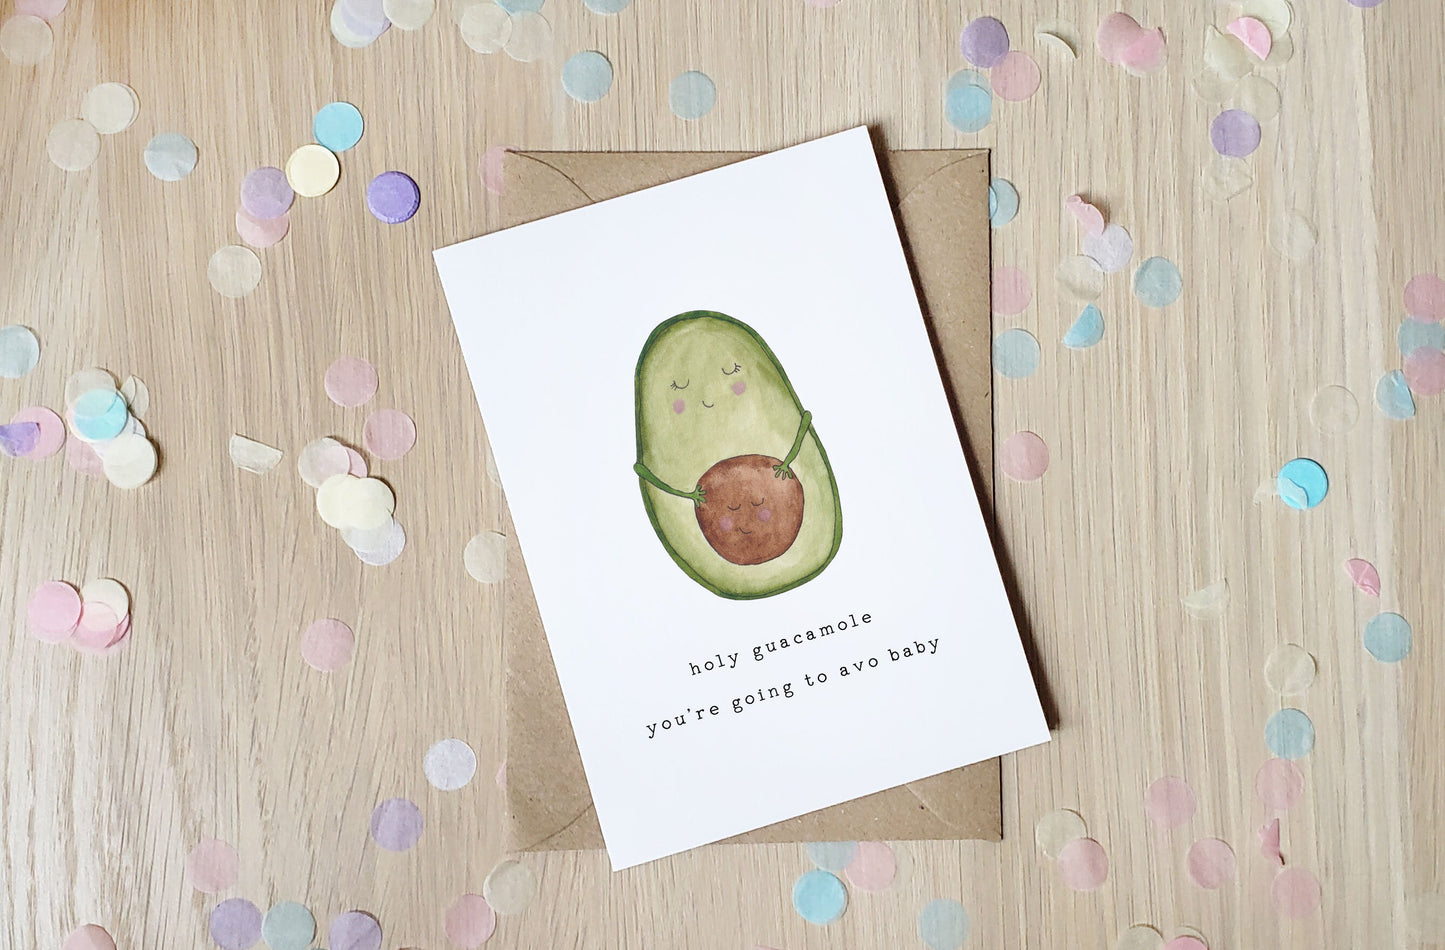 Holy Guacamole, you're going to Avo Baby - Greeting Card